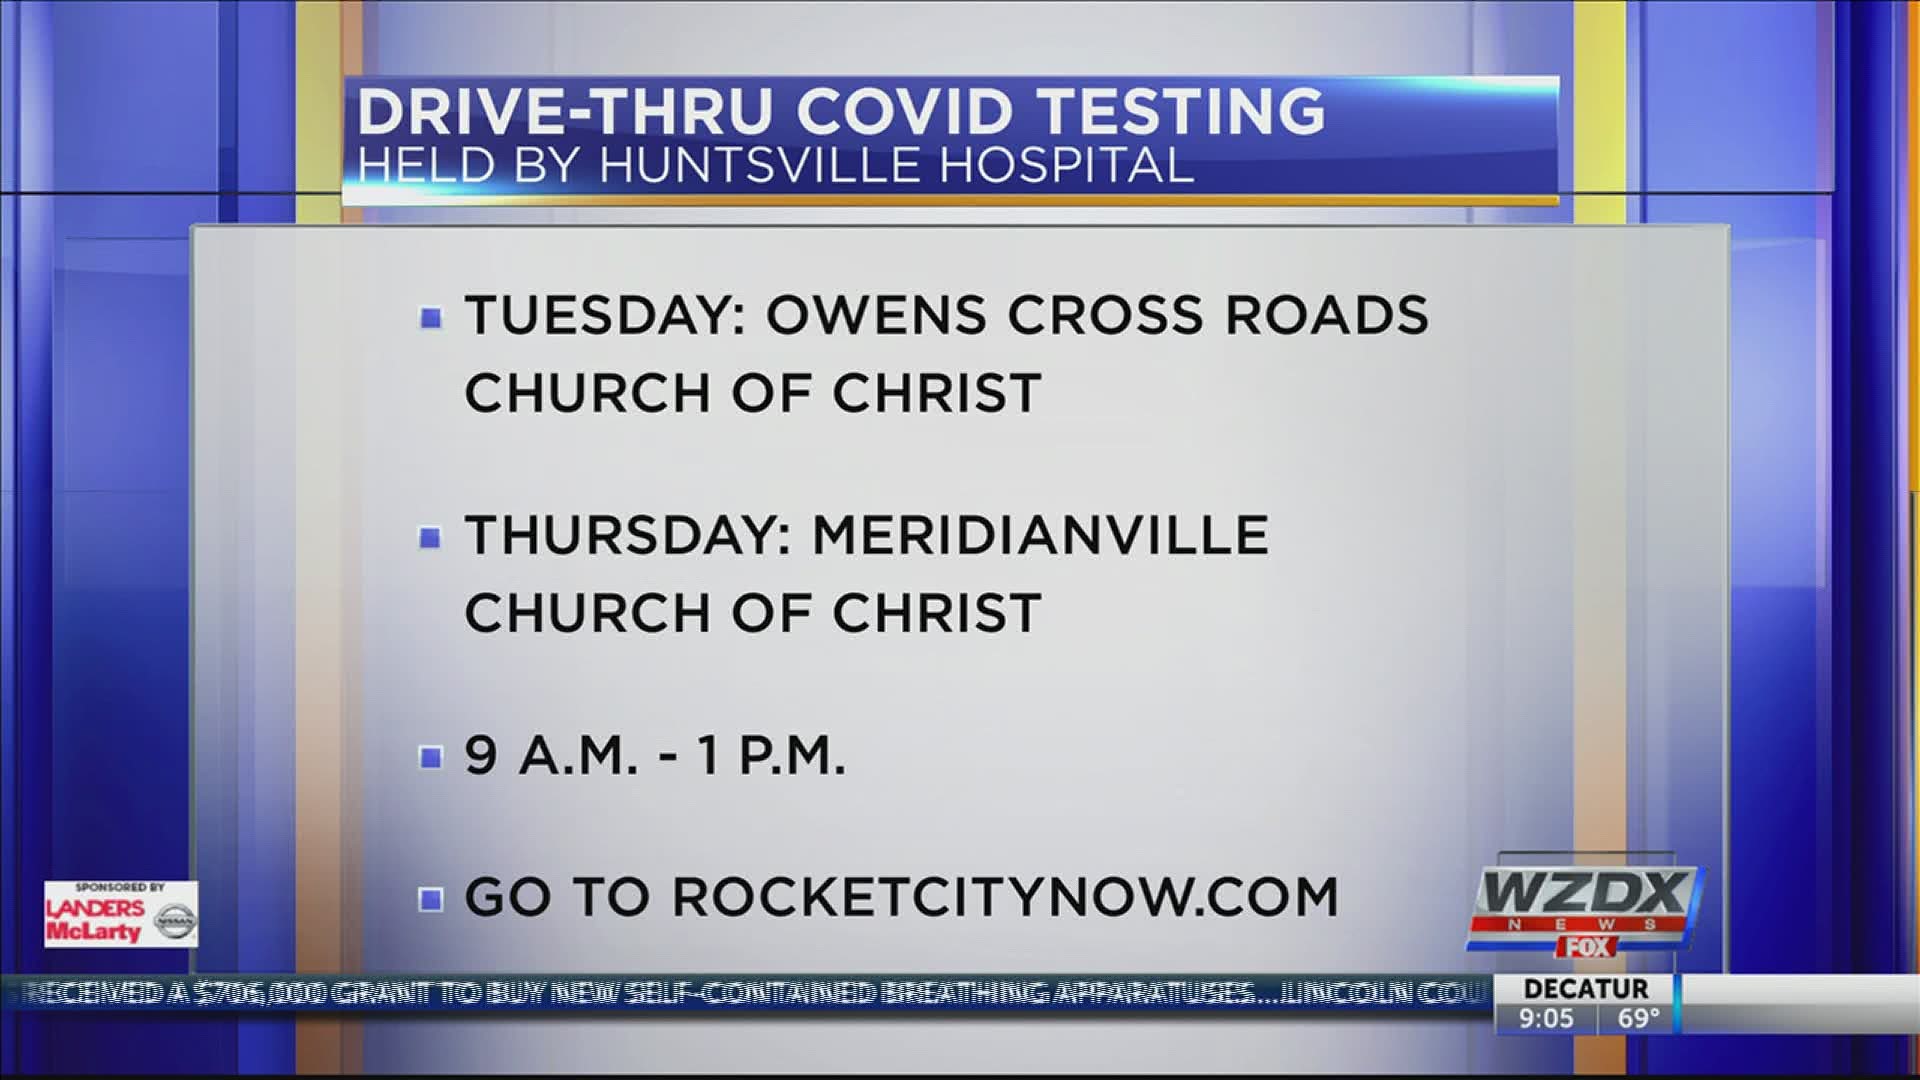 Thrive Alabama and Huntsville Hospital are teaming up to offer drive-through COVID-19 testing at two churches in Madison County next week.